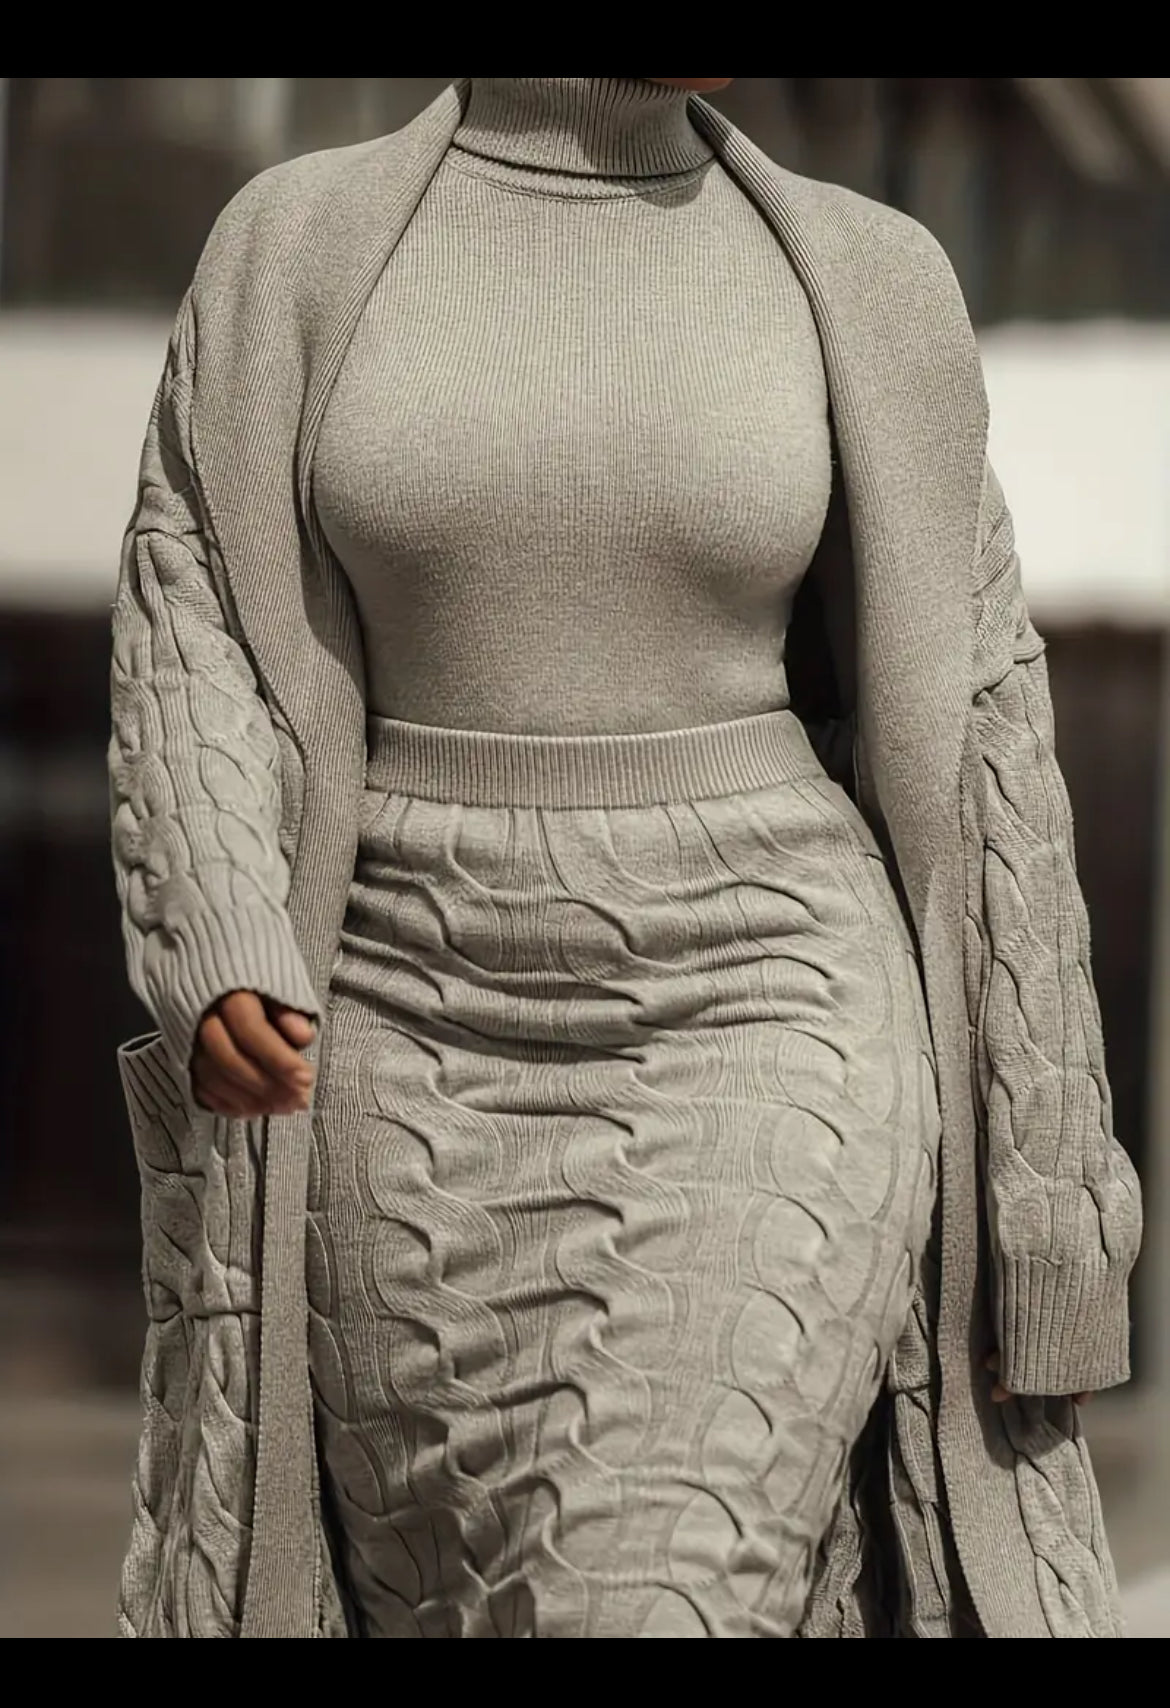 Posh 💋 Mommies Collection, Knitted Elegant Two-piece Set, Open Front Cardigan With Pockets & Turtleneck Sweater & High Waist Skirt